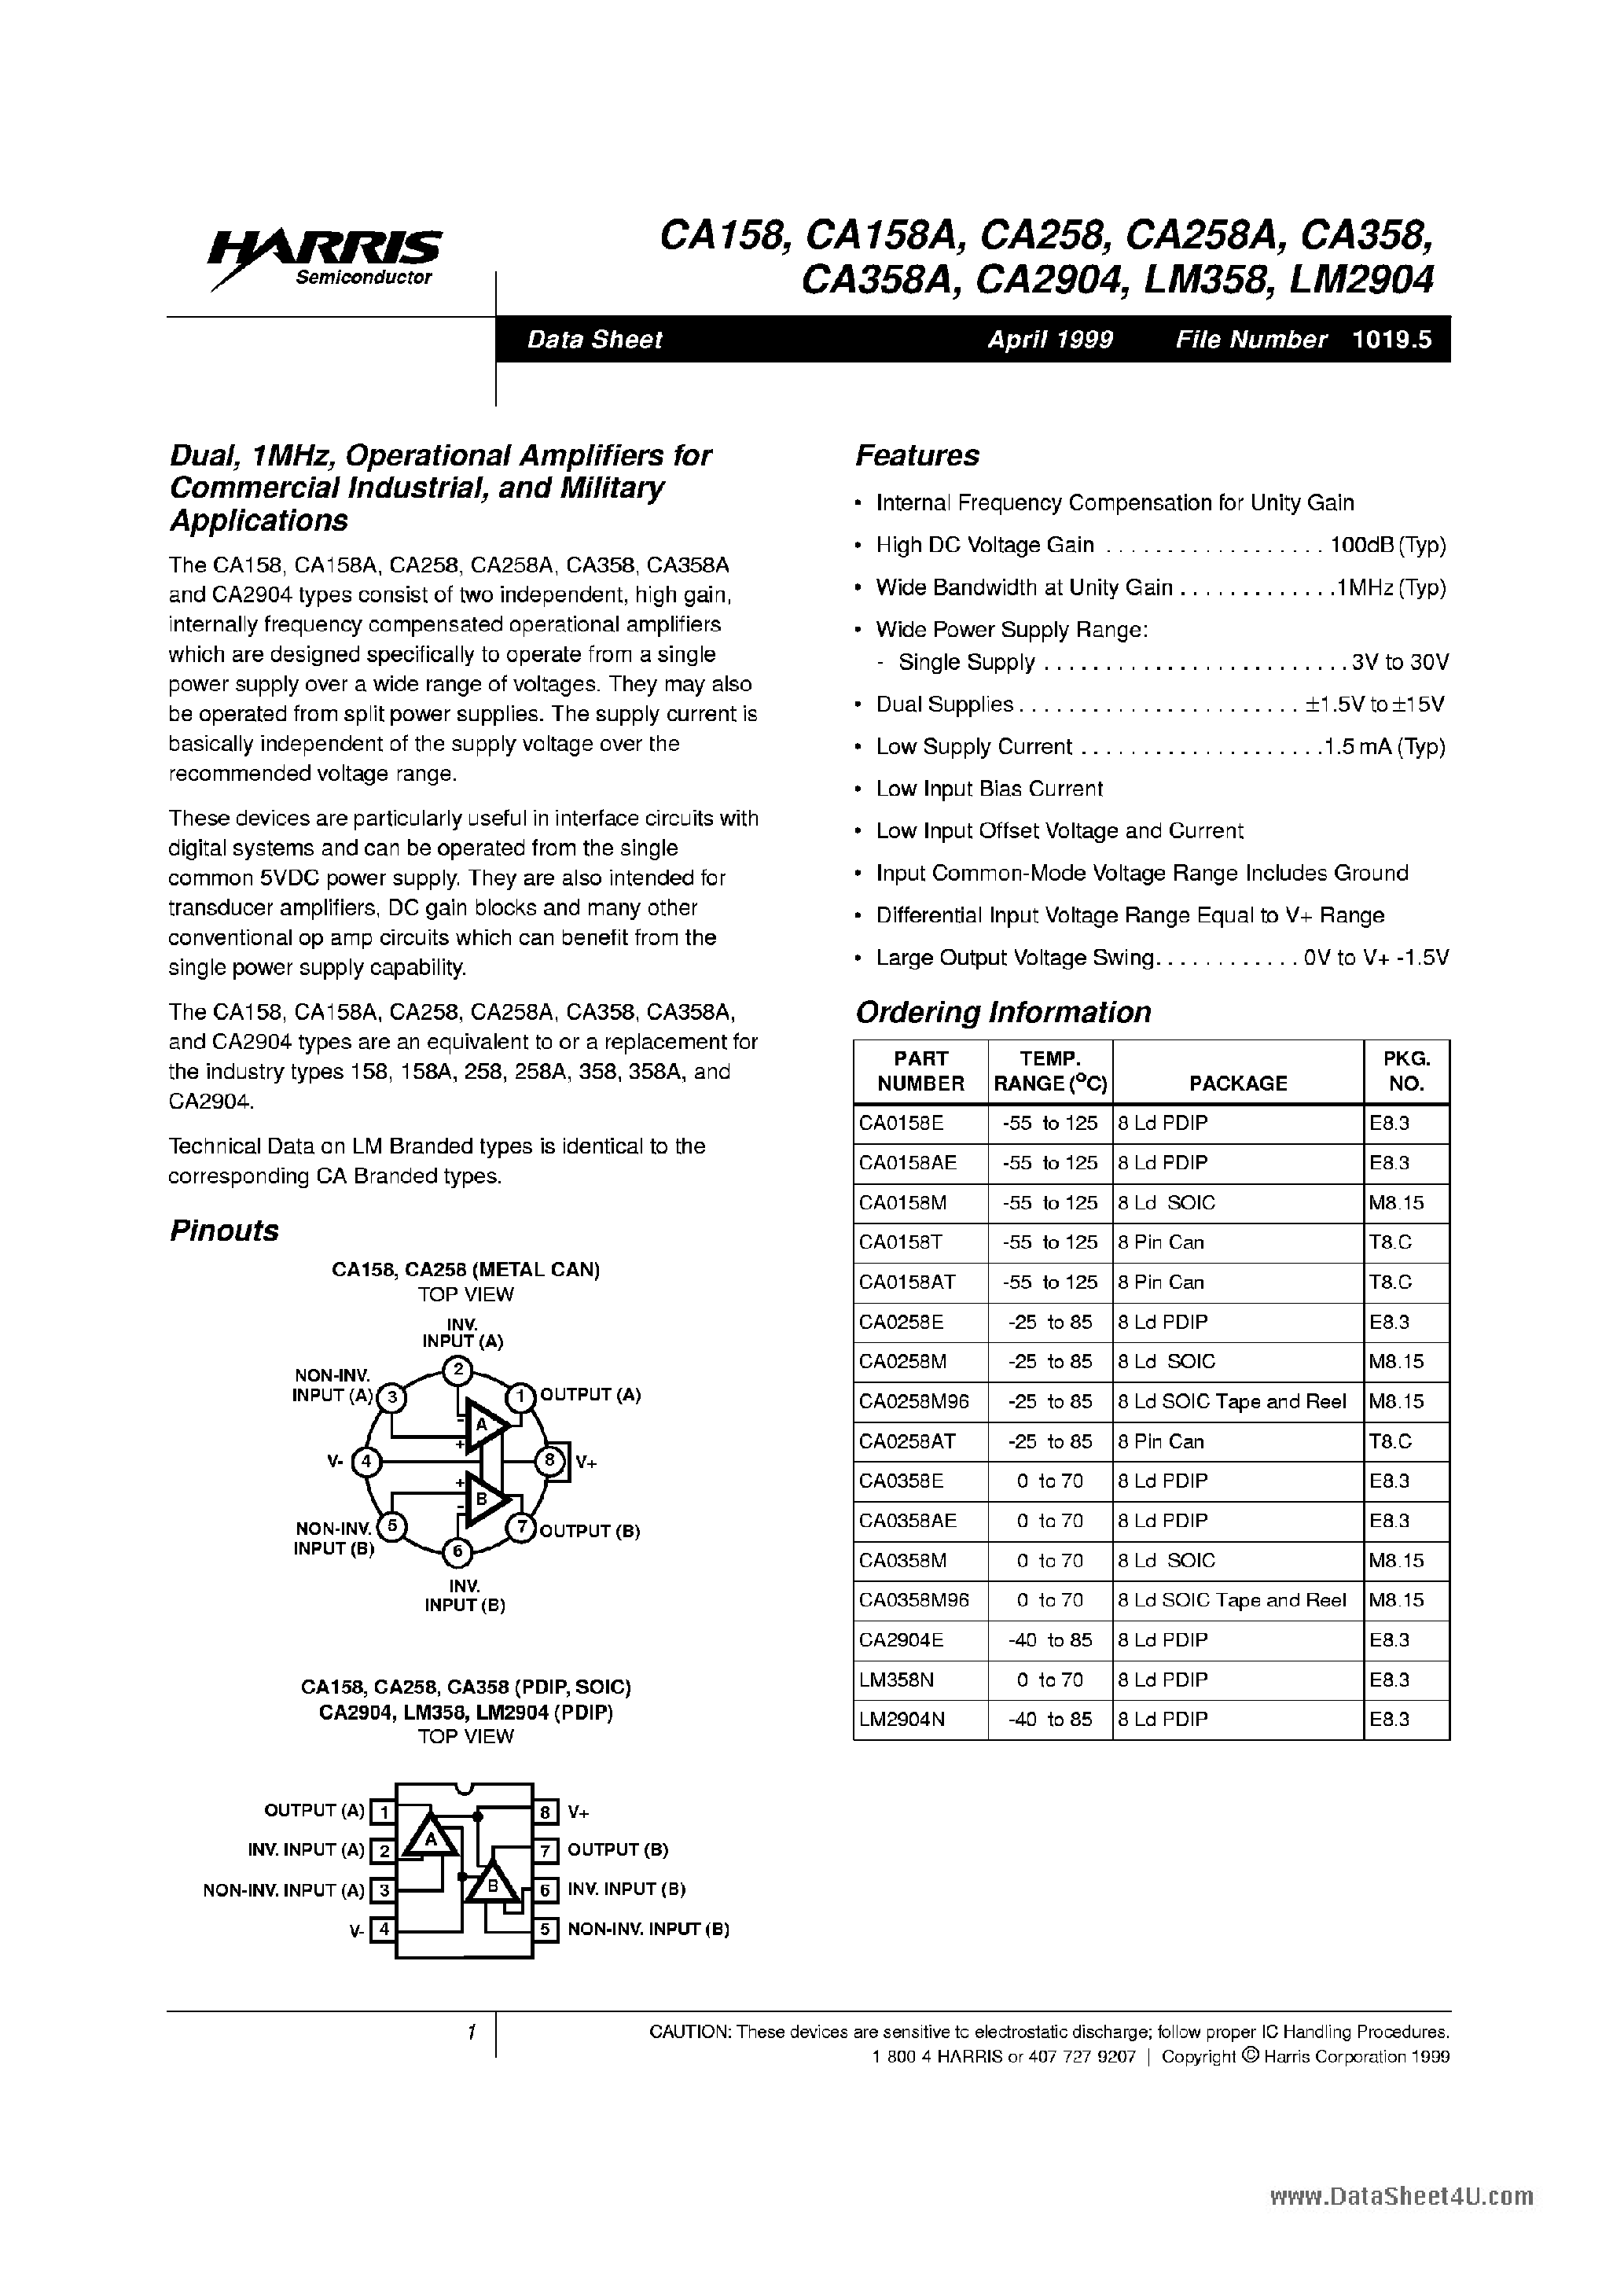 Datasheet LM2904 - 1MHz OPERATIONAL AMPLIFIERS page 1